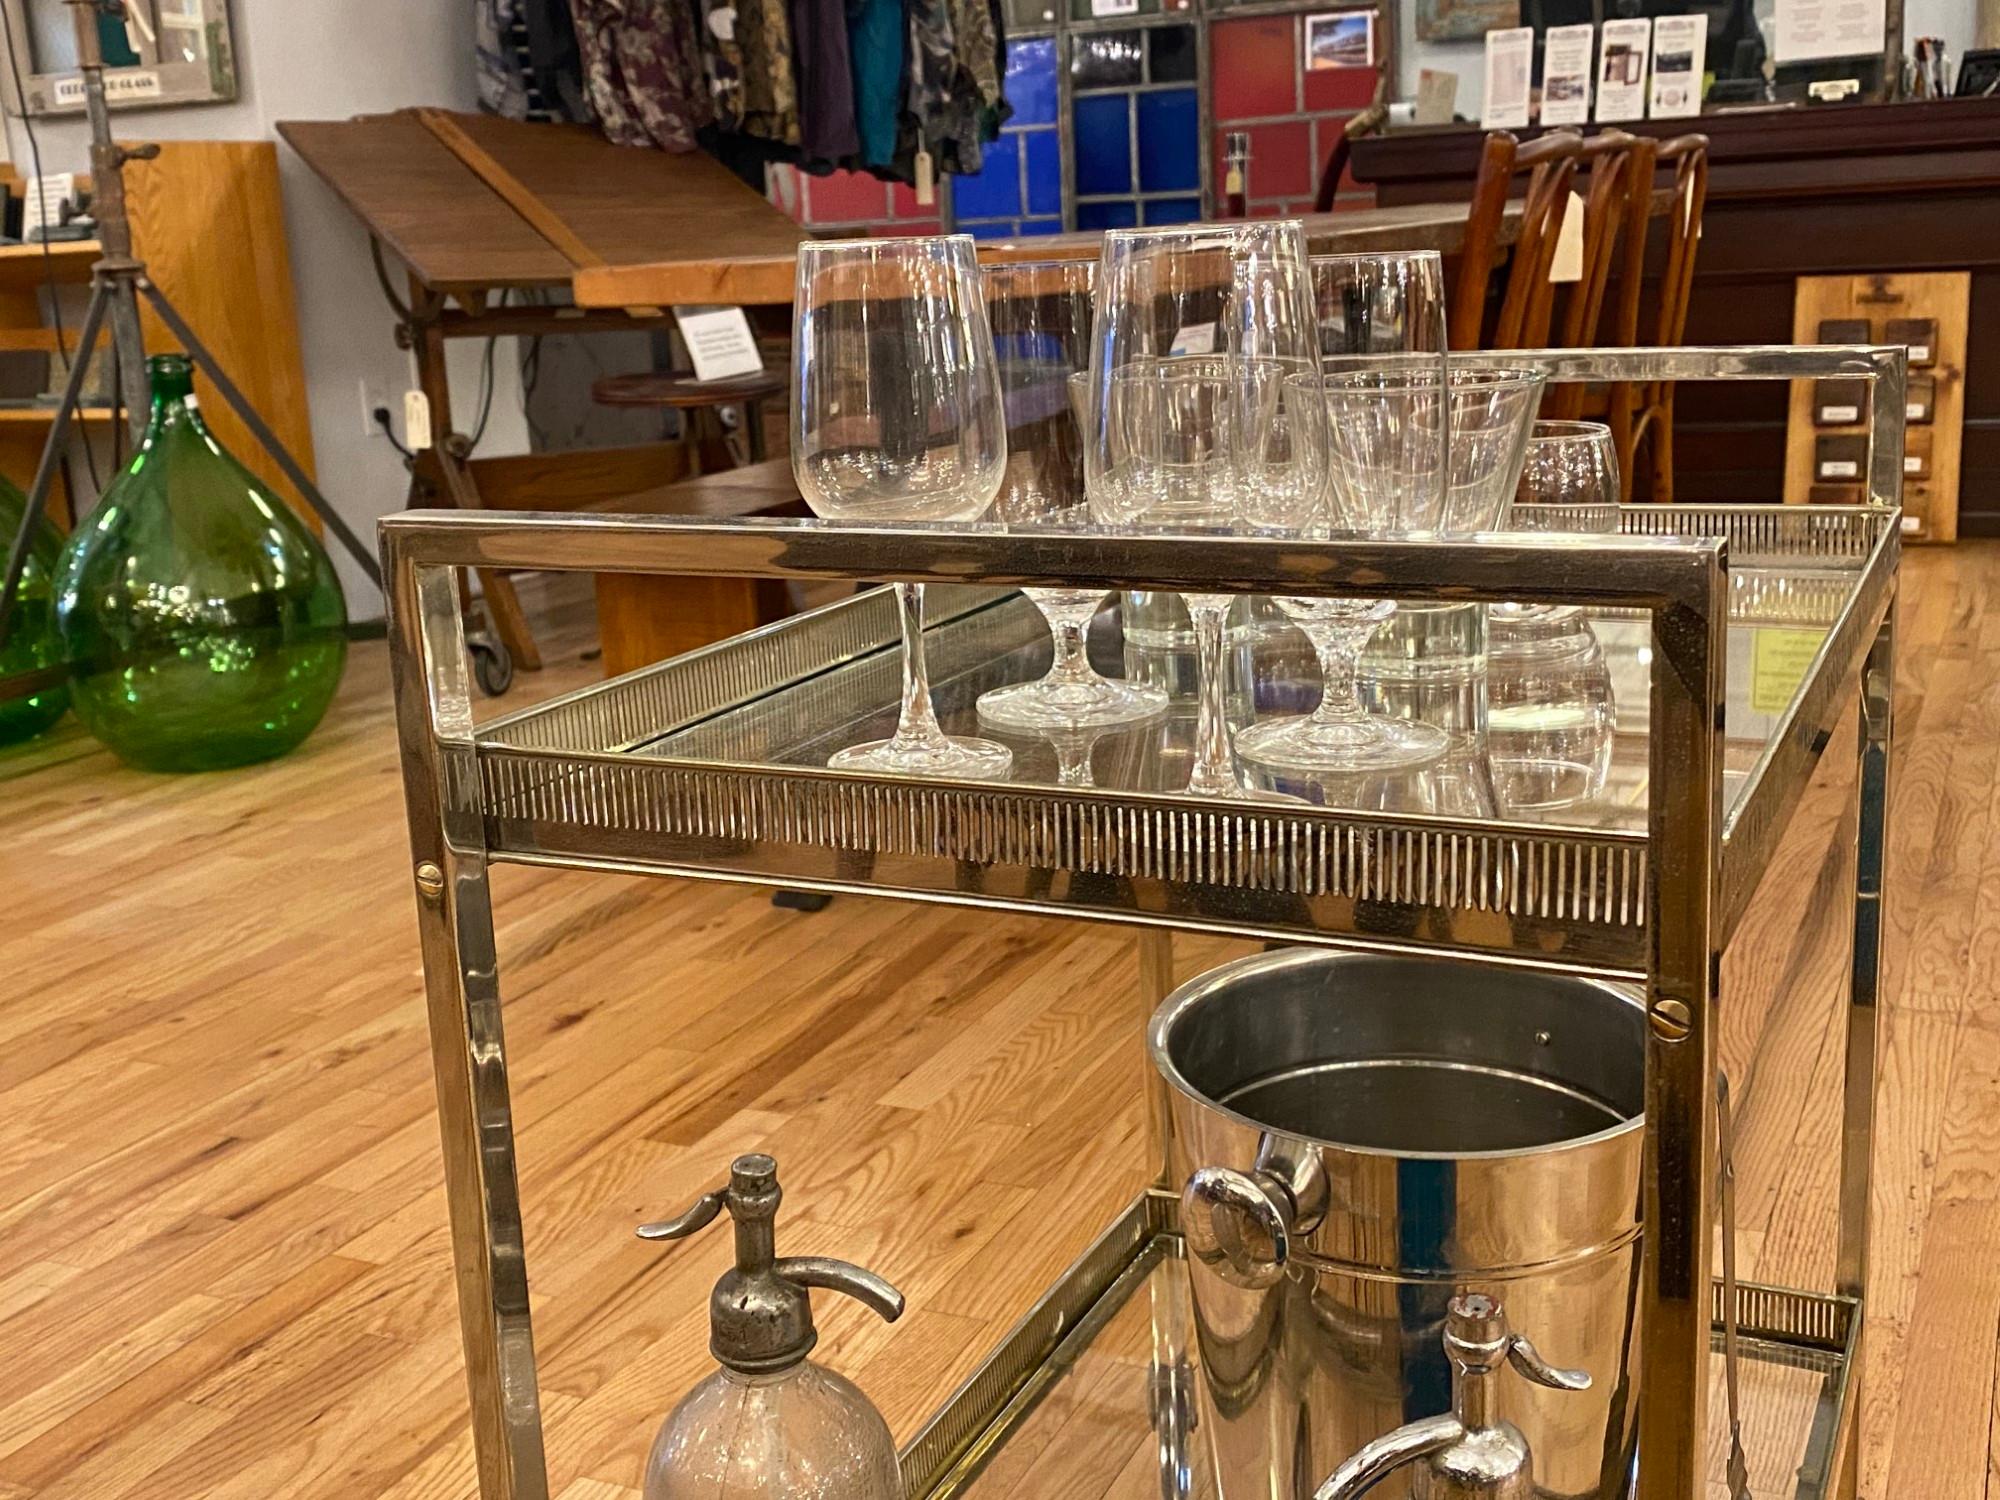 1990s Mid-Century Modern Bar Cart from Belgium, Nickel-Plated with Glass Shelves 6